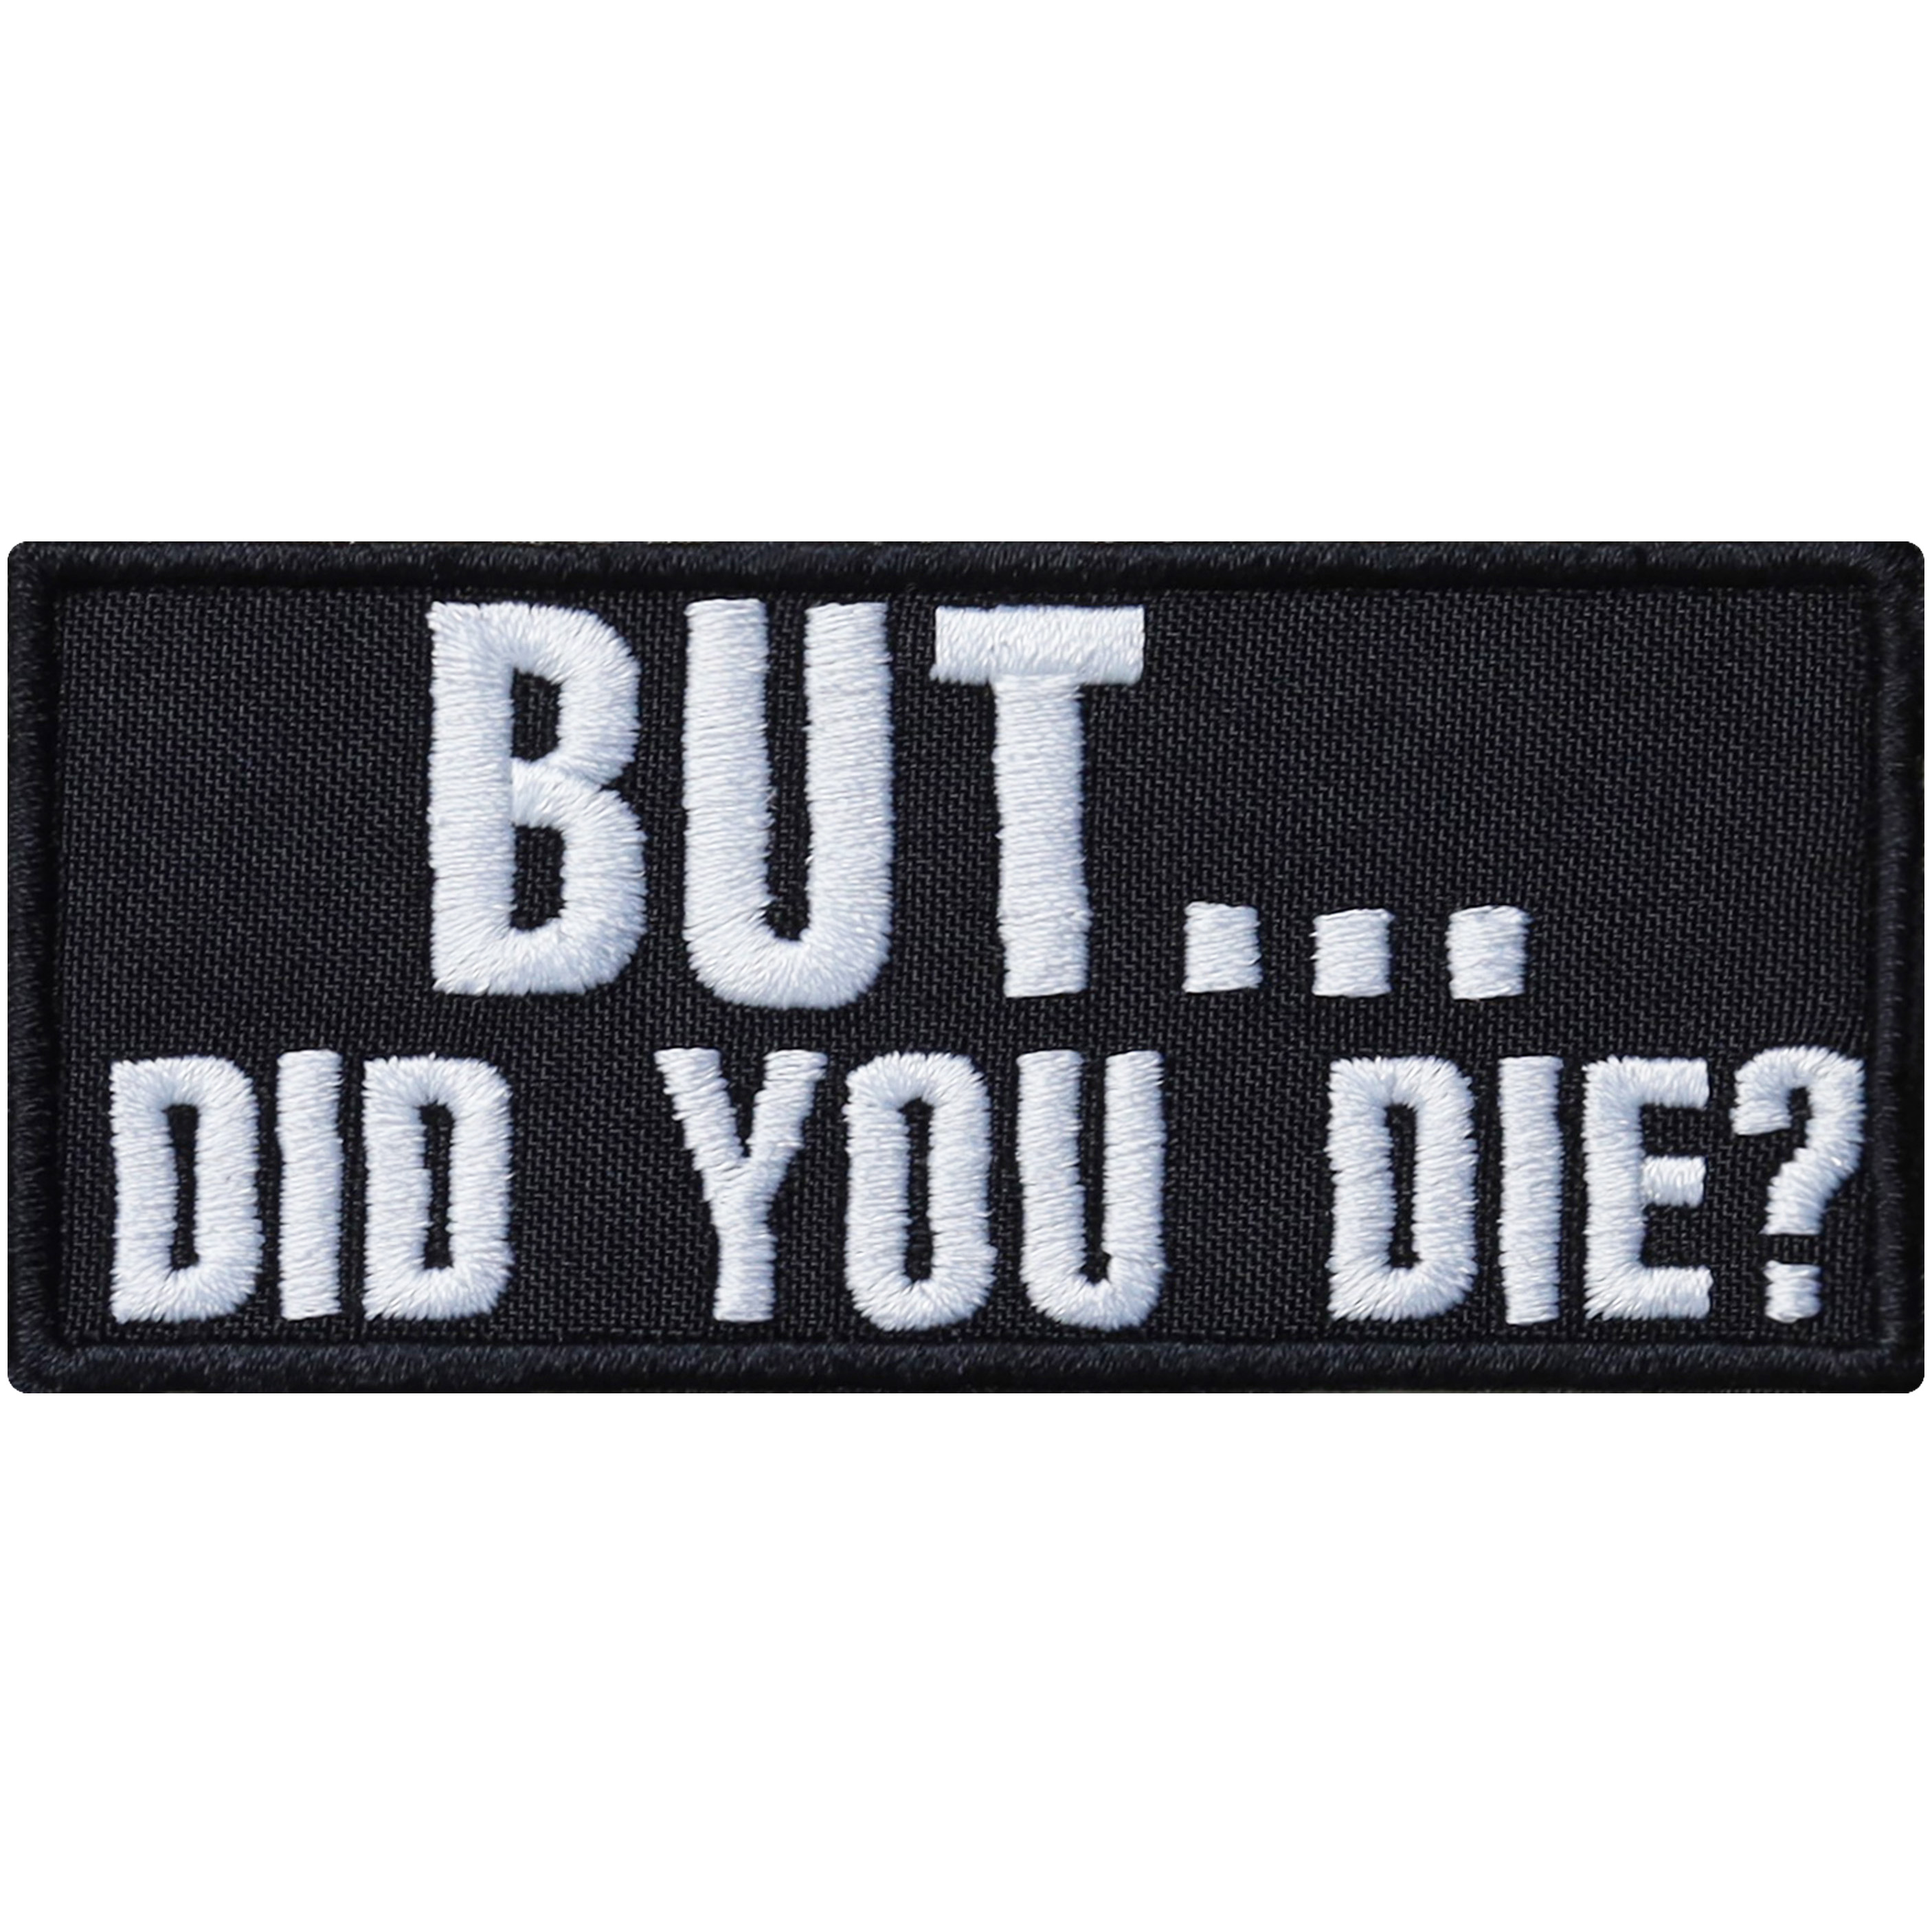 But... did you die? - Patch